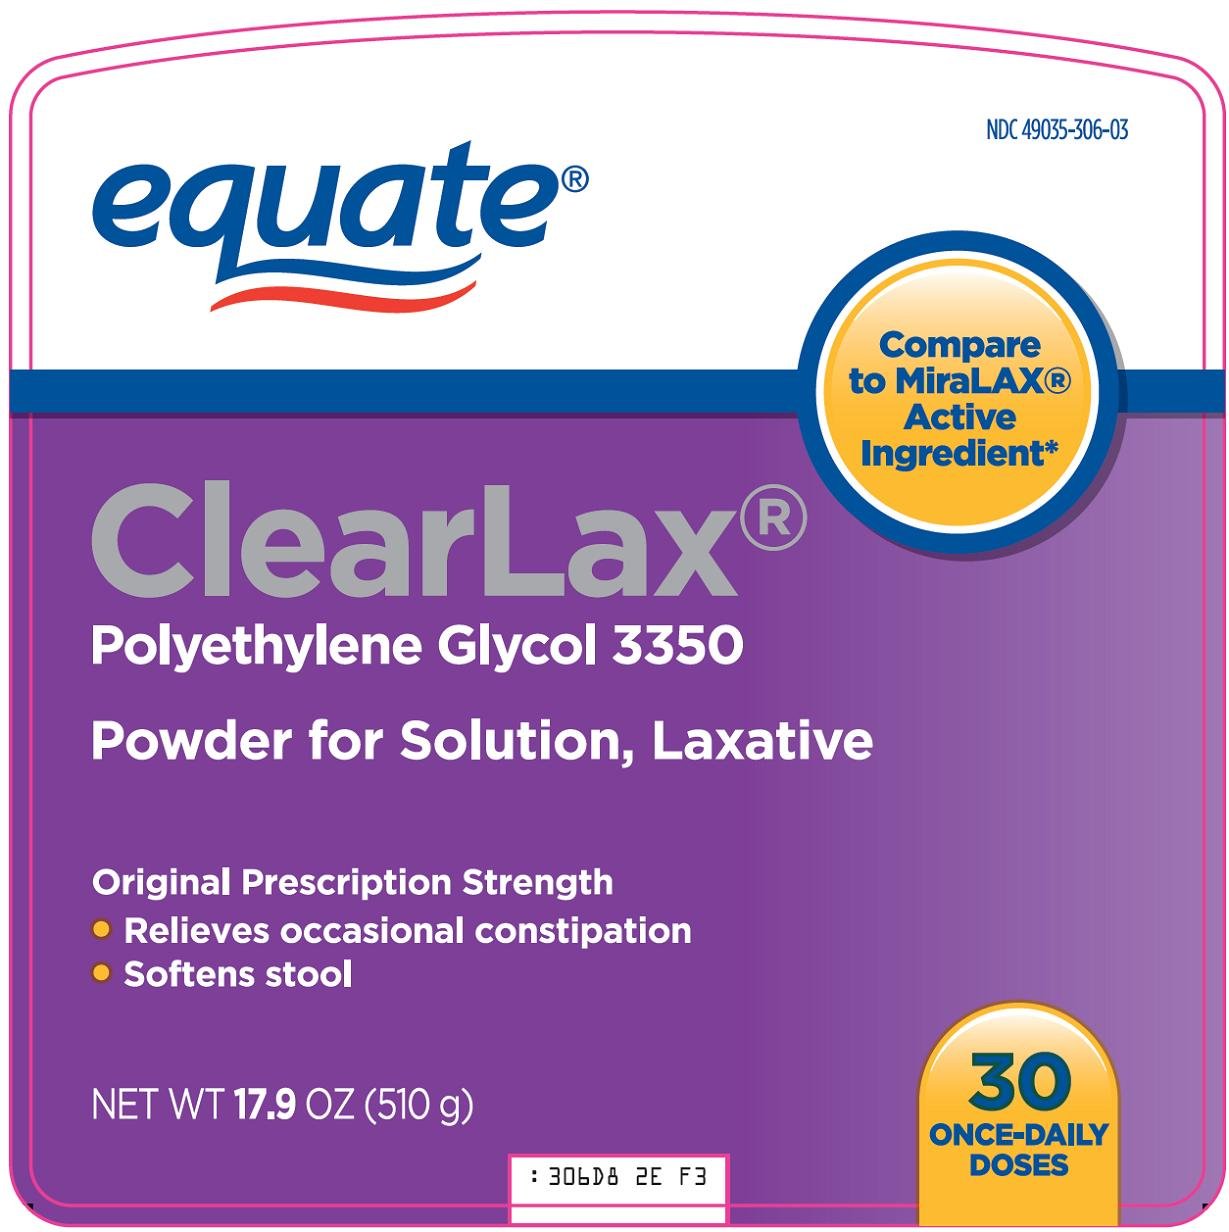 ClearLax Label Image 1